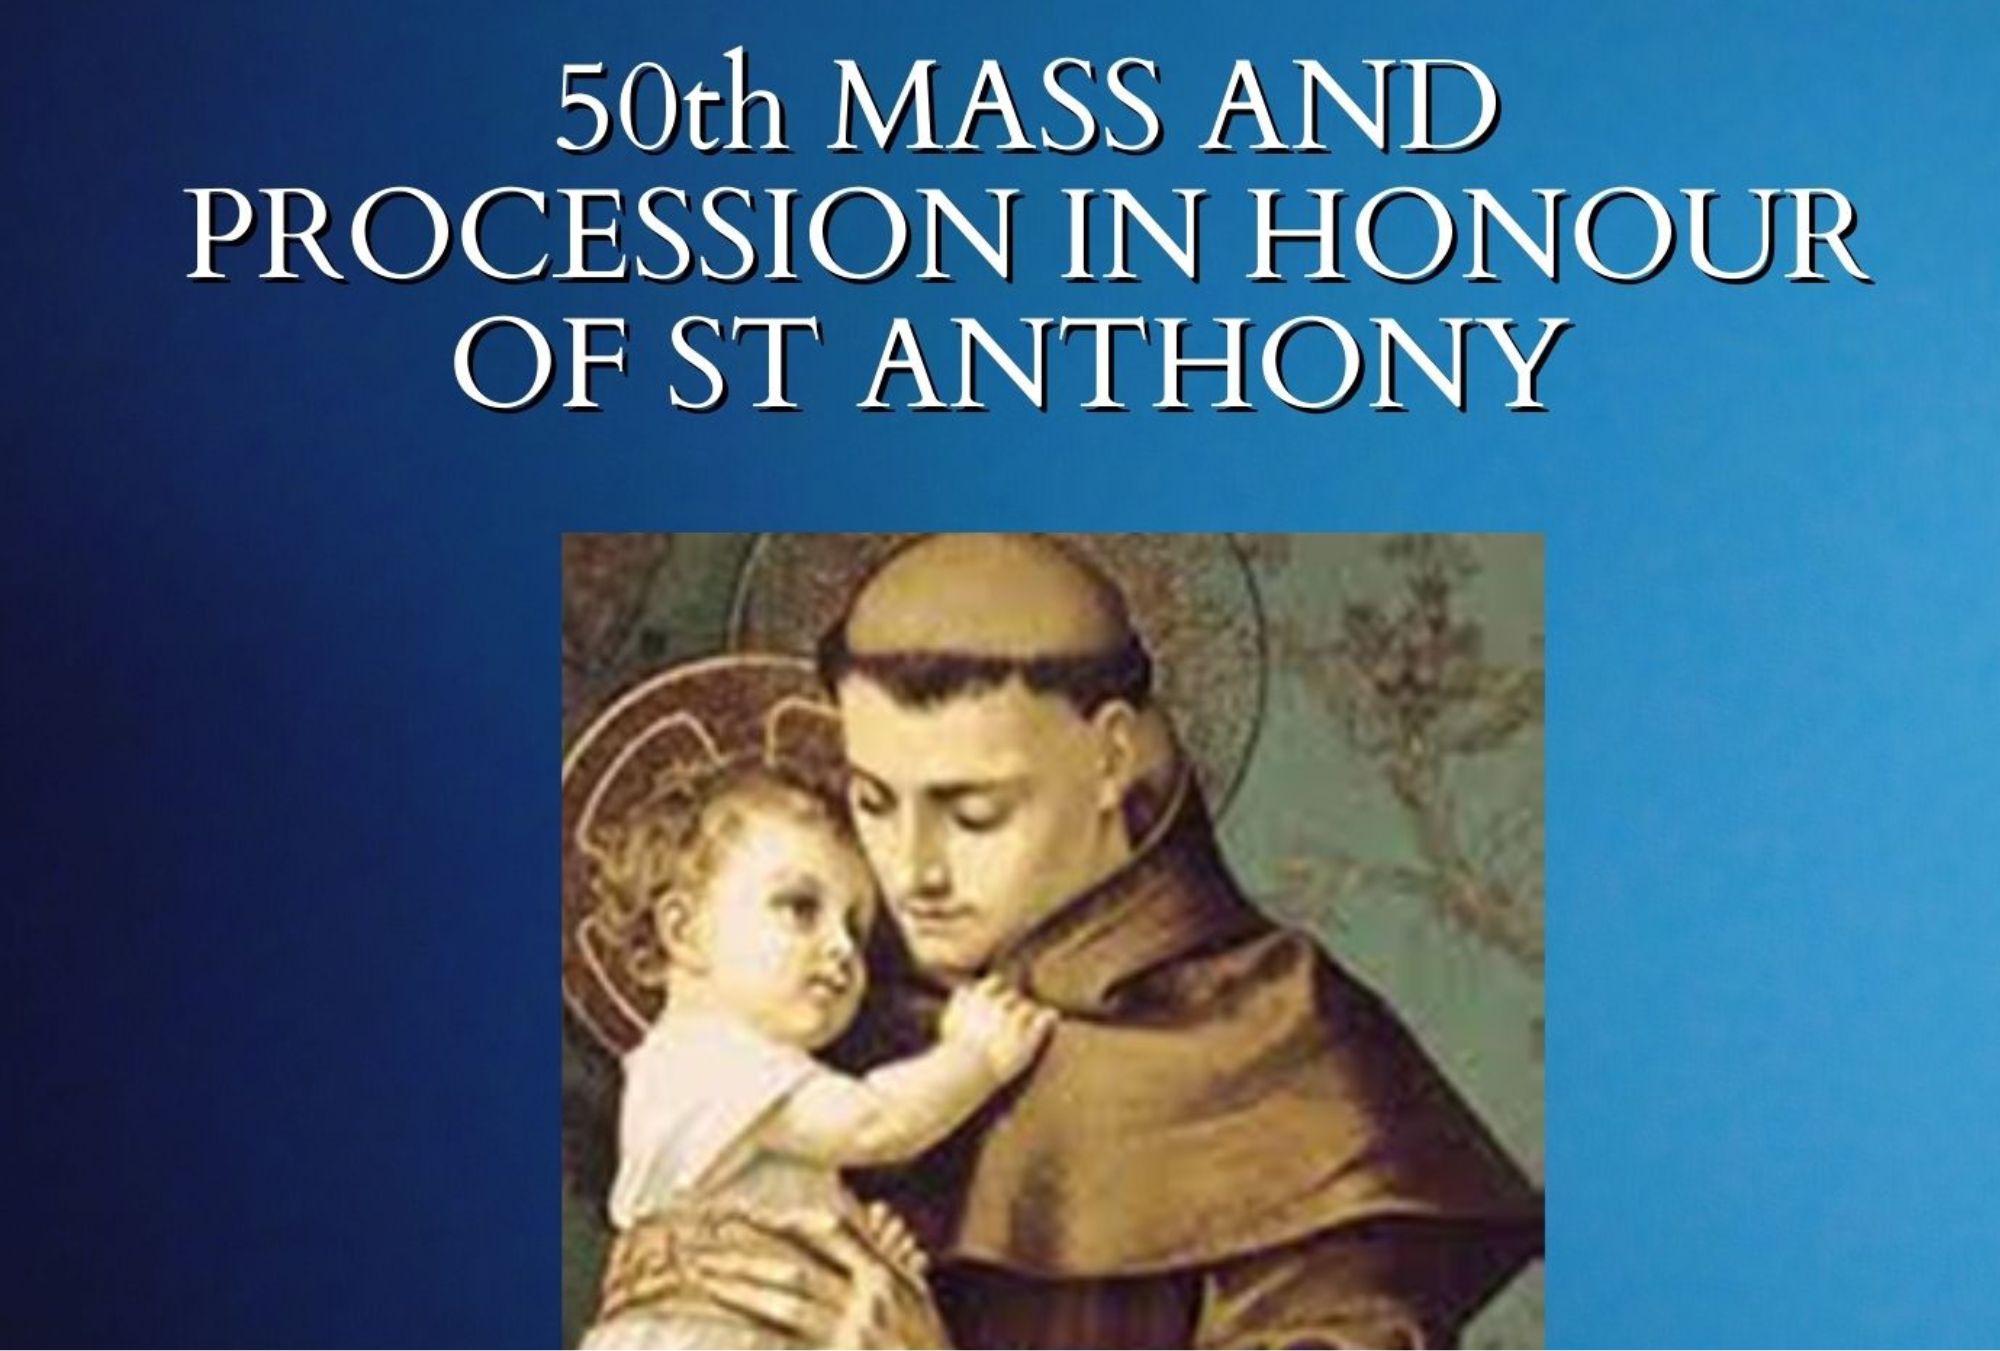 50th MASS AND PROCESSION IN HONOUR OF ST ANTHONY